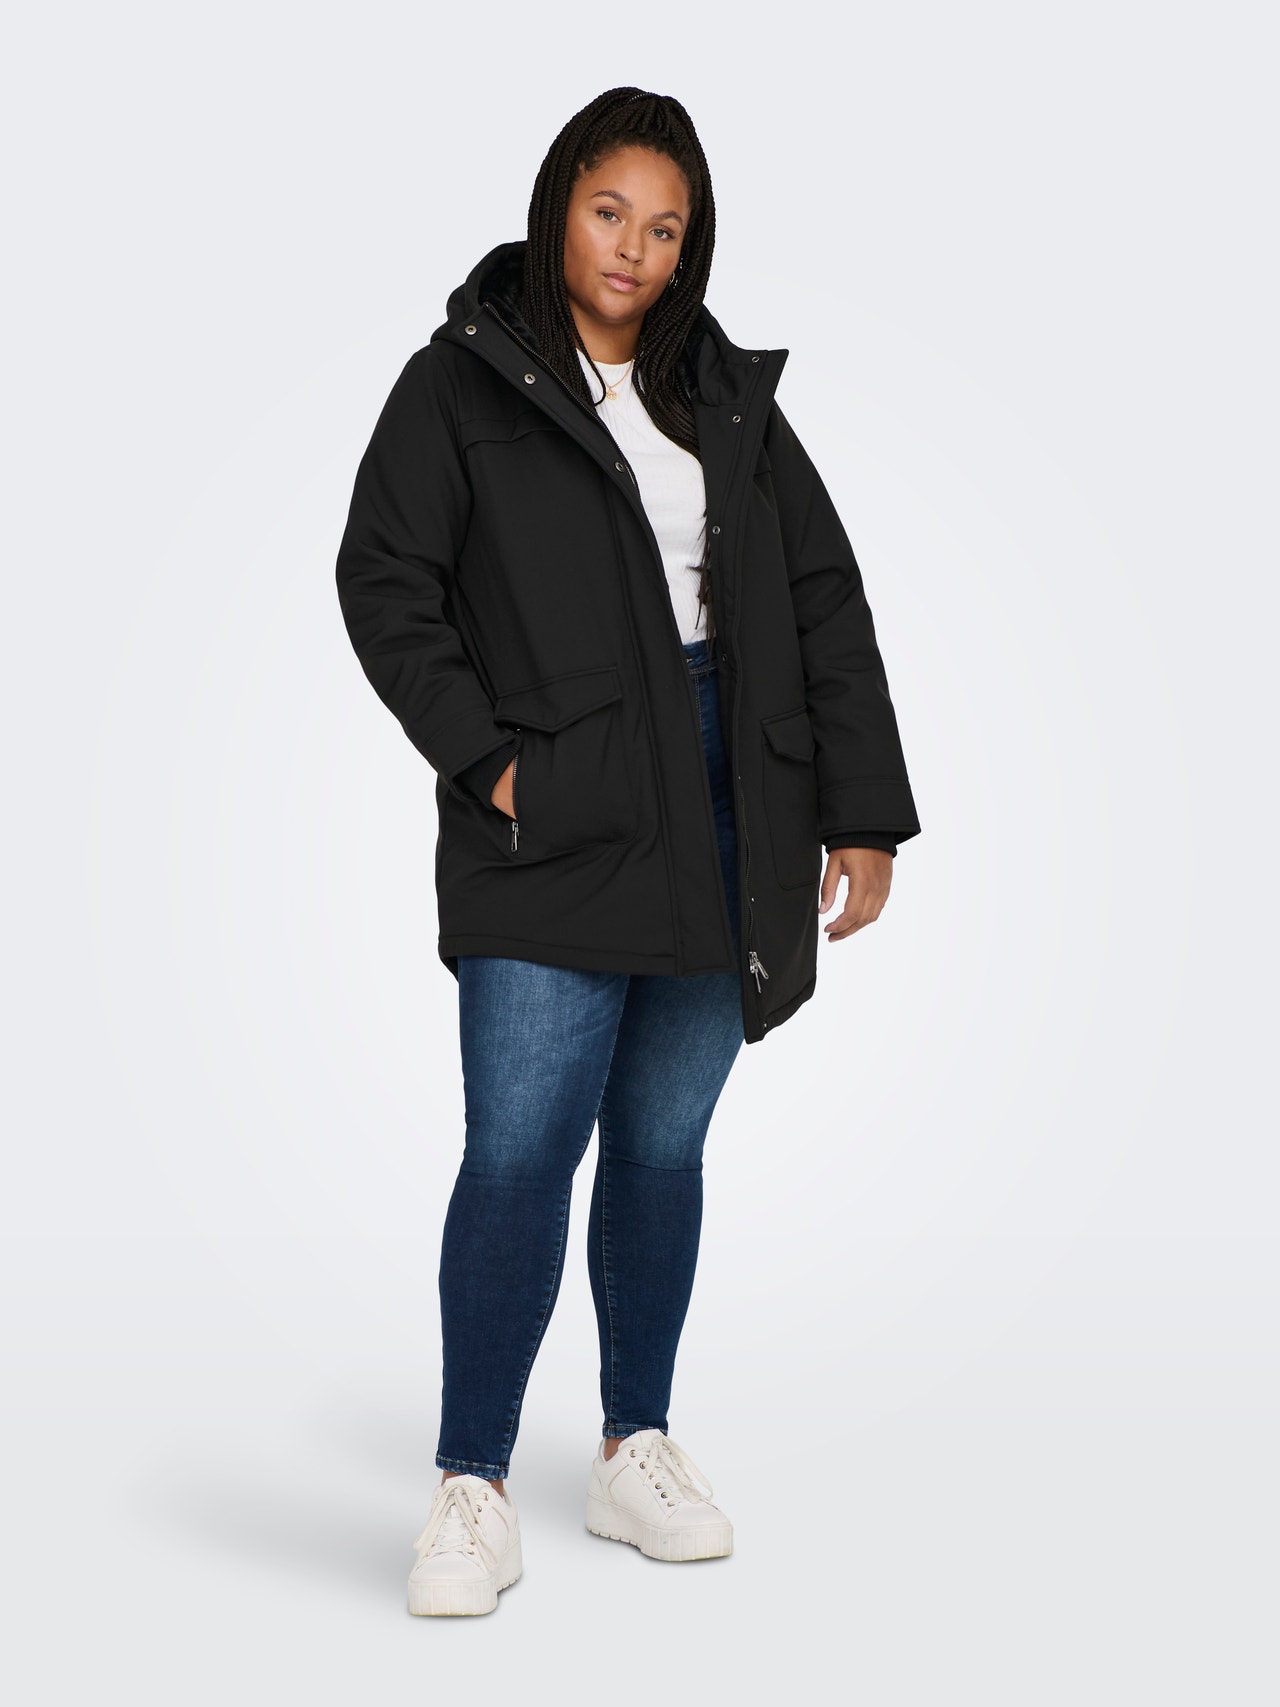 ONLY Curvy lined Parka -Black - 15263136